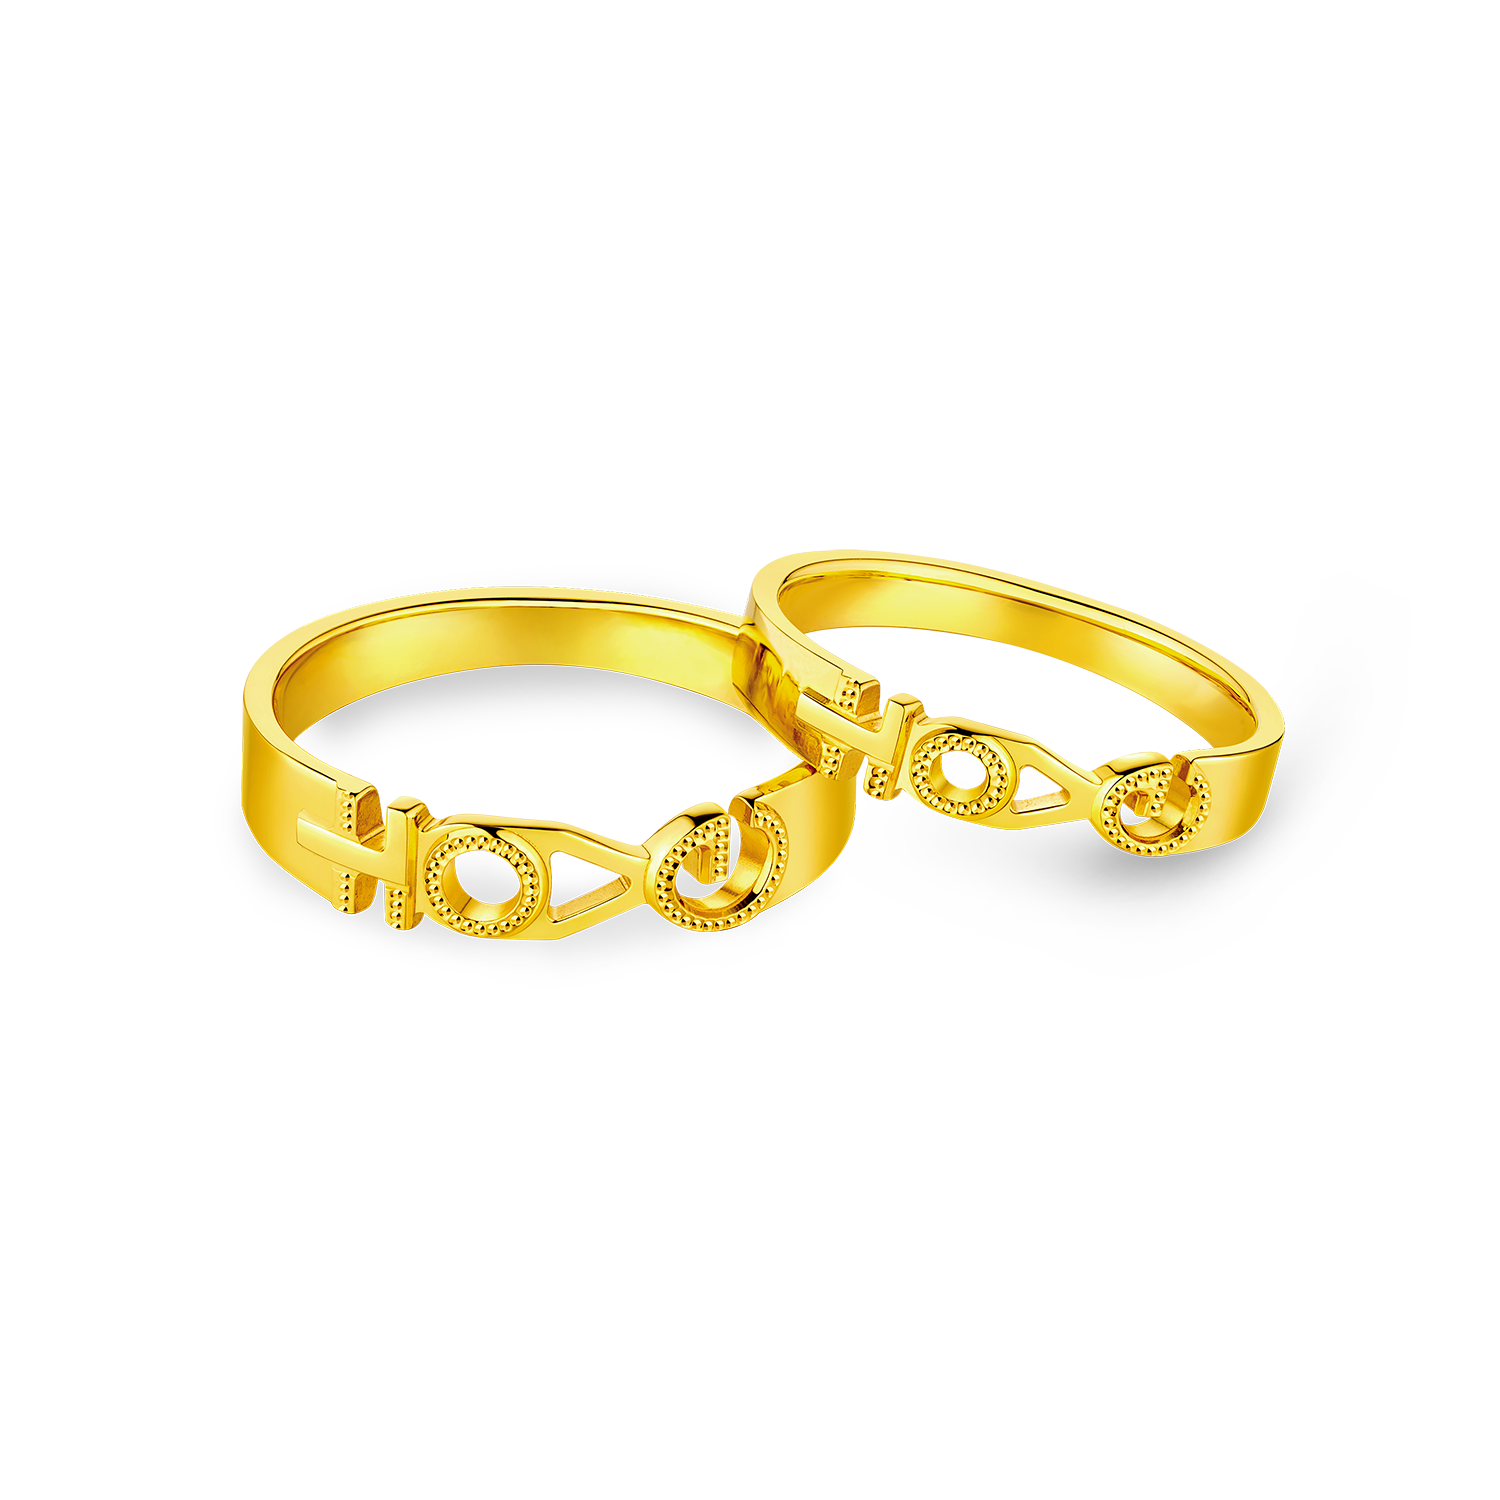 Goldstyle "Moment of Love and Bliss" Gold  Wedding Rings